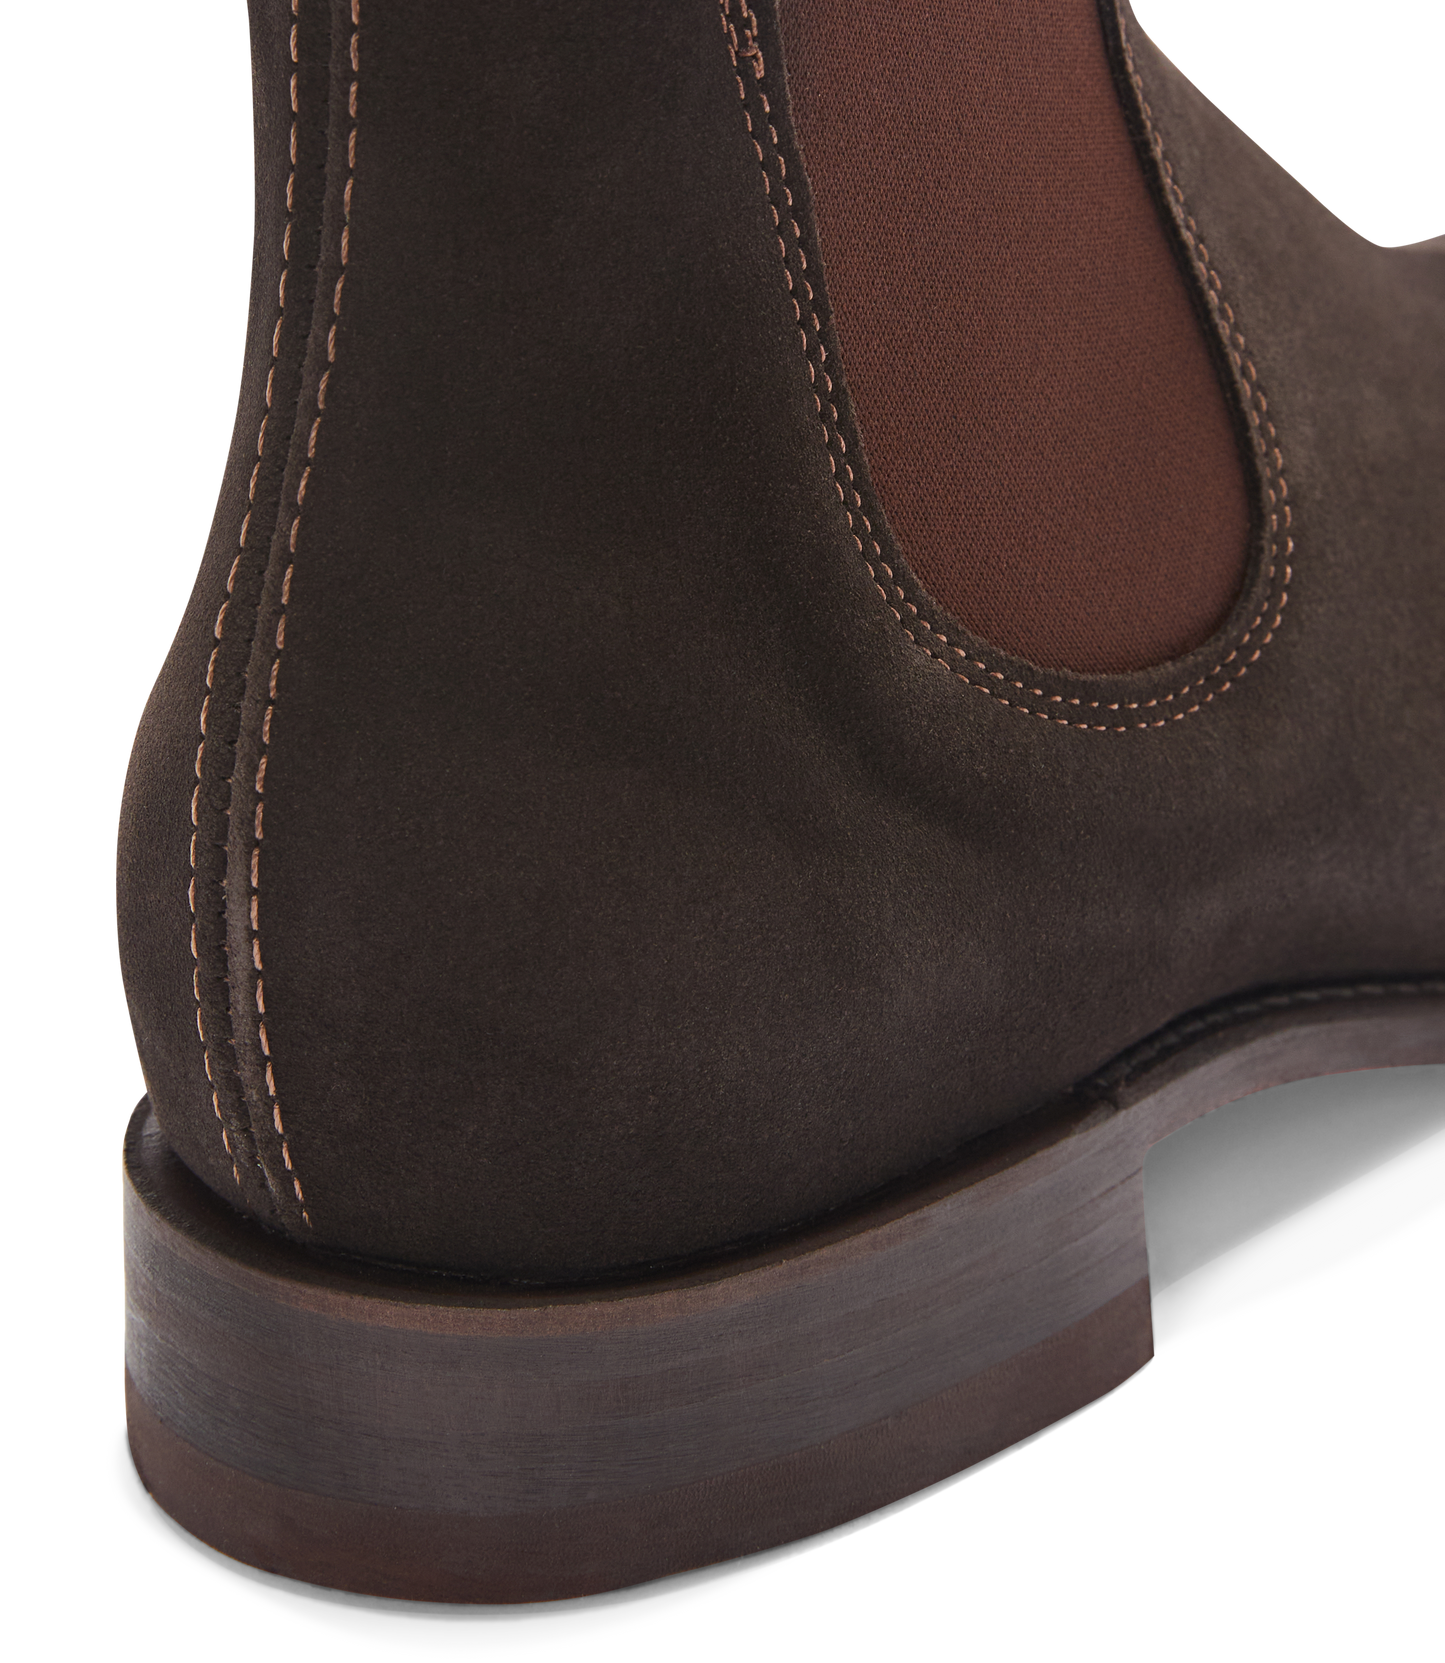 RM Williams B543S.08FGCP10 Comfort Craftsman Chocolate Suede Chelsea Boots